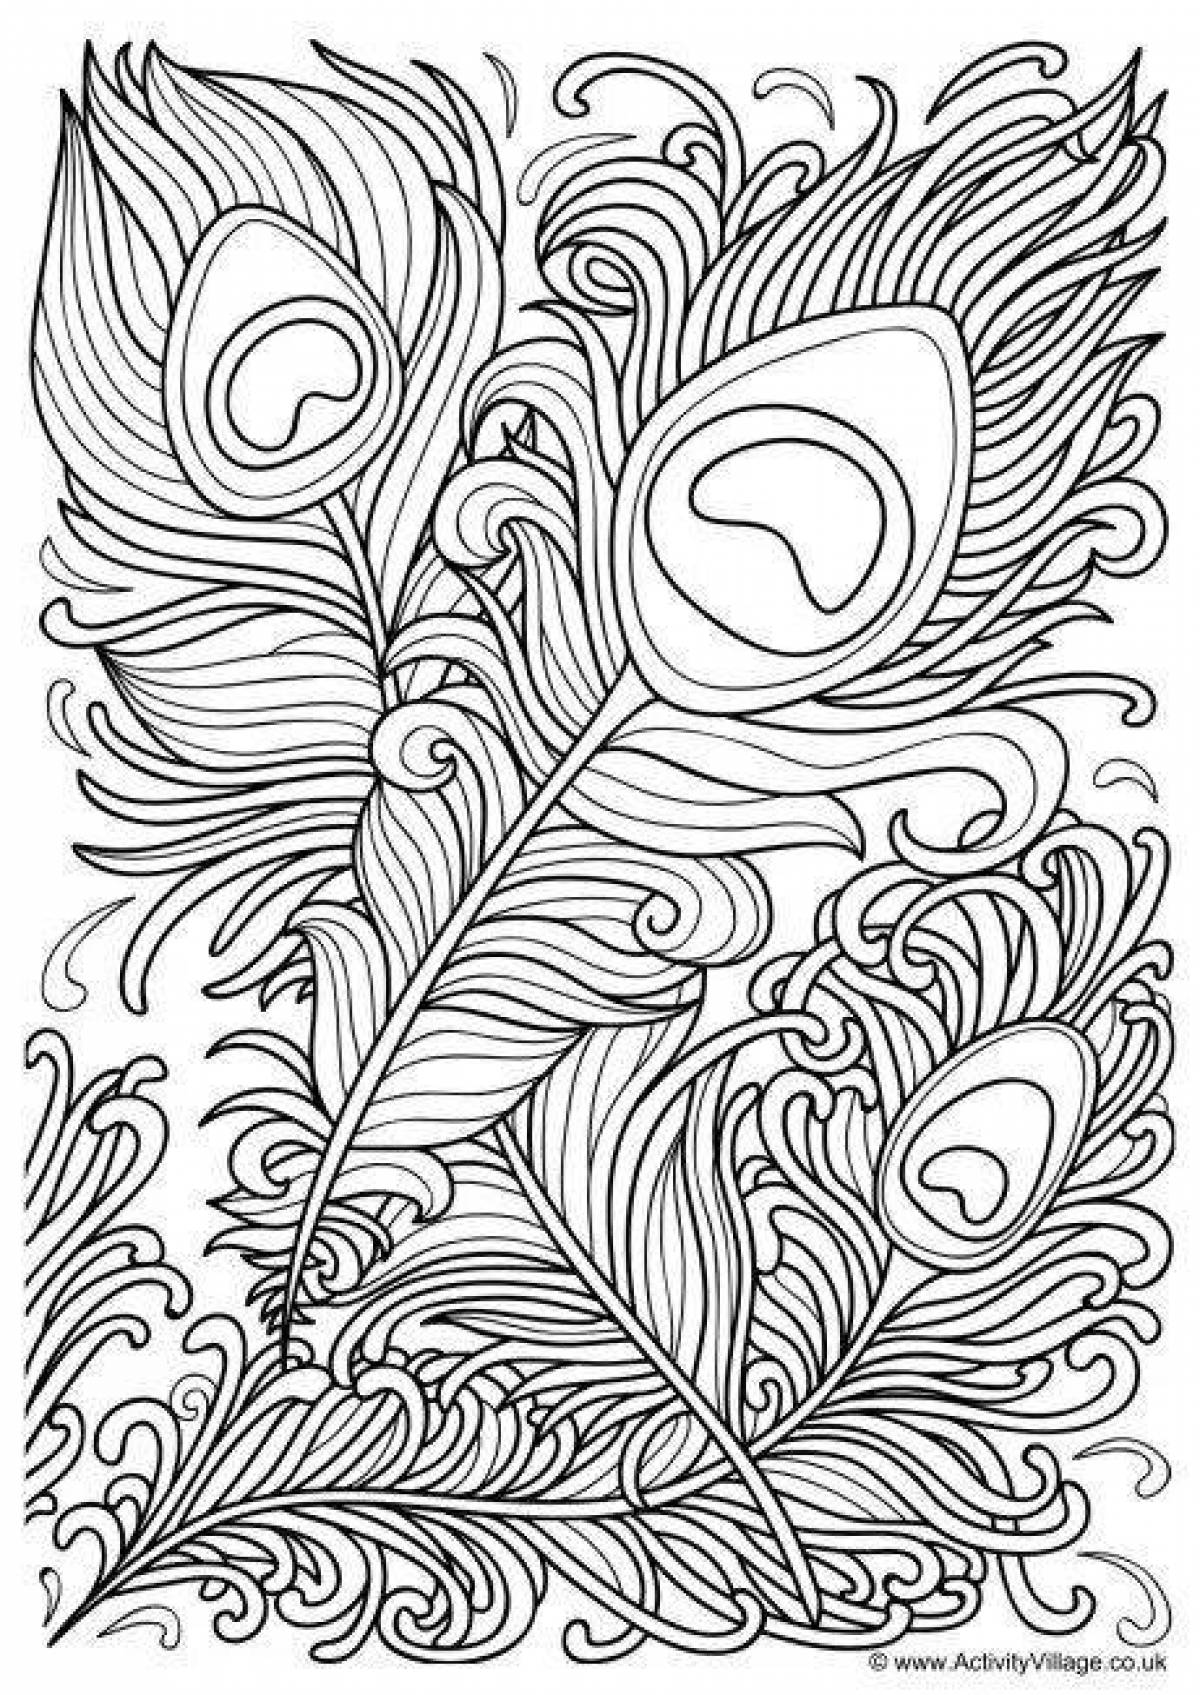 Deluxe peacock feather coloring book